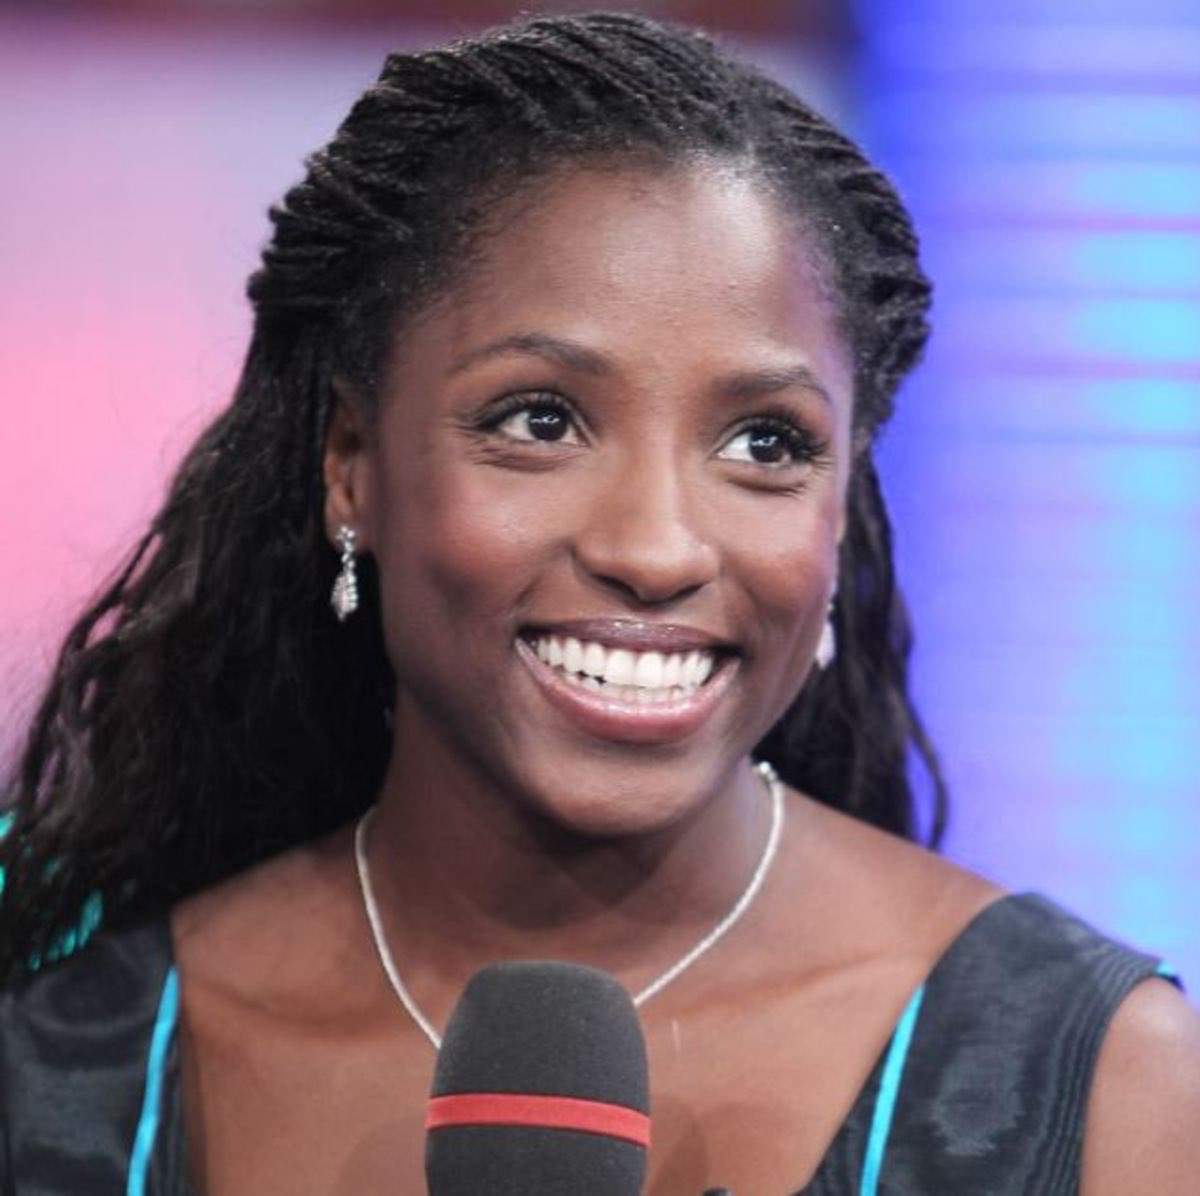 RUTINA WESLEY: known to most as tara thornton, the impenetrable best friend of TRUE BLOOD’s sookie stackhouse. following the show’s success, she went on to recur on nbc’s HANNIBAL. she now leads the cast of OWN’s QUEEN SUGAR!